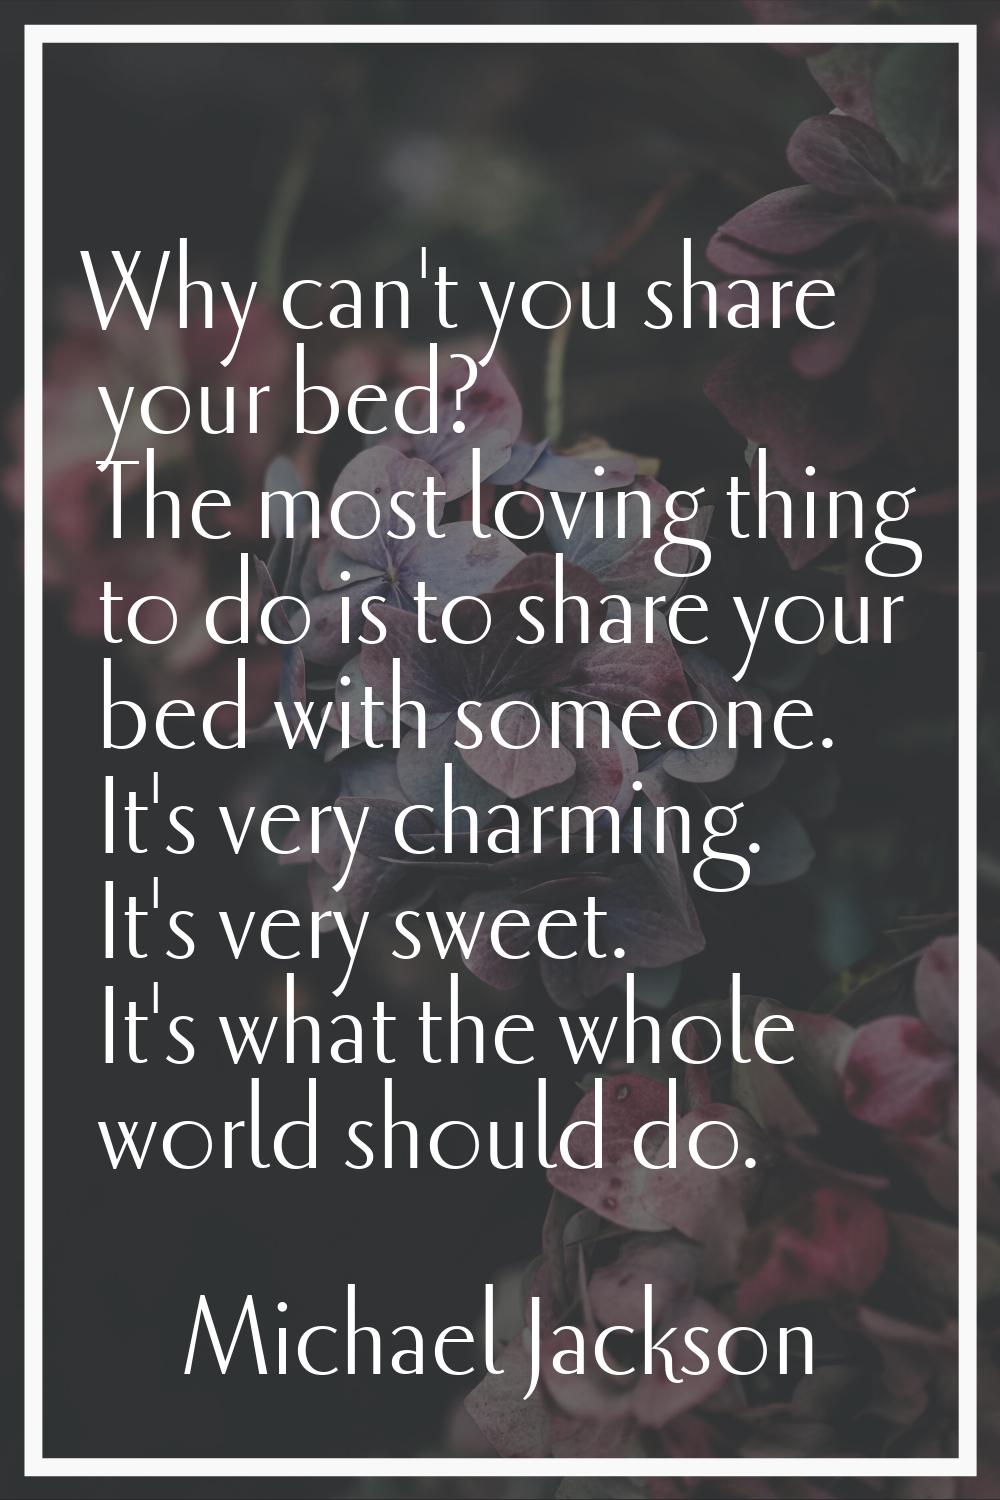 Why can't you share your bed? The most loving thing to do is to share your bed with someone. It's v